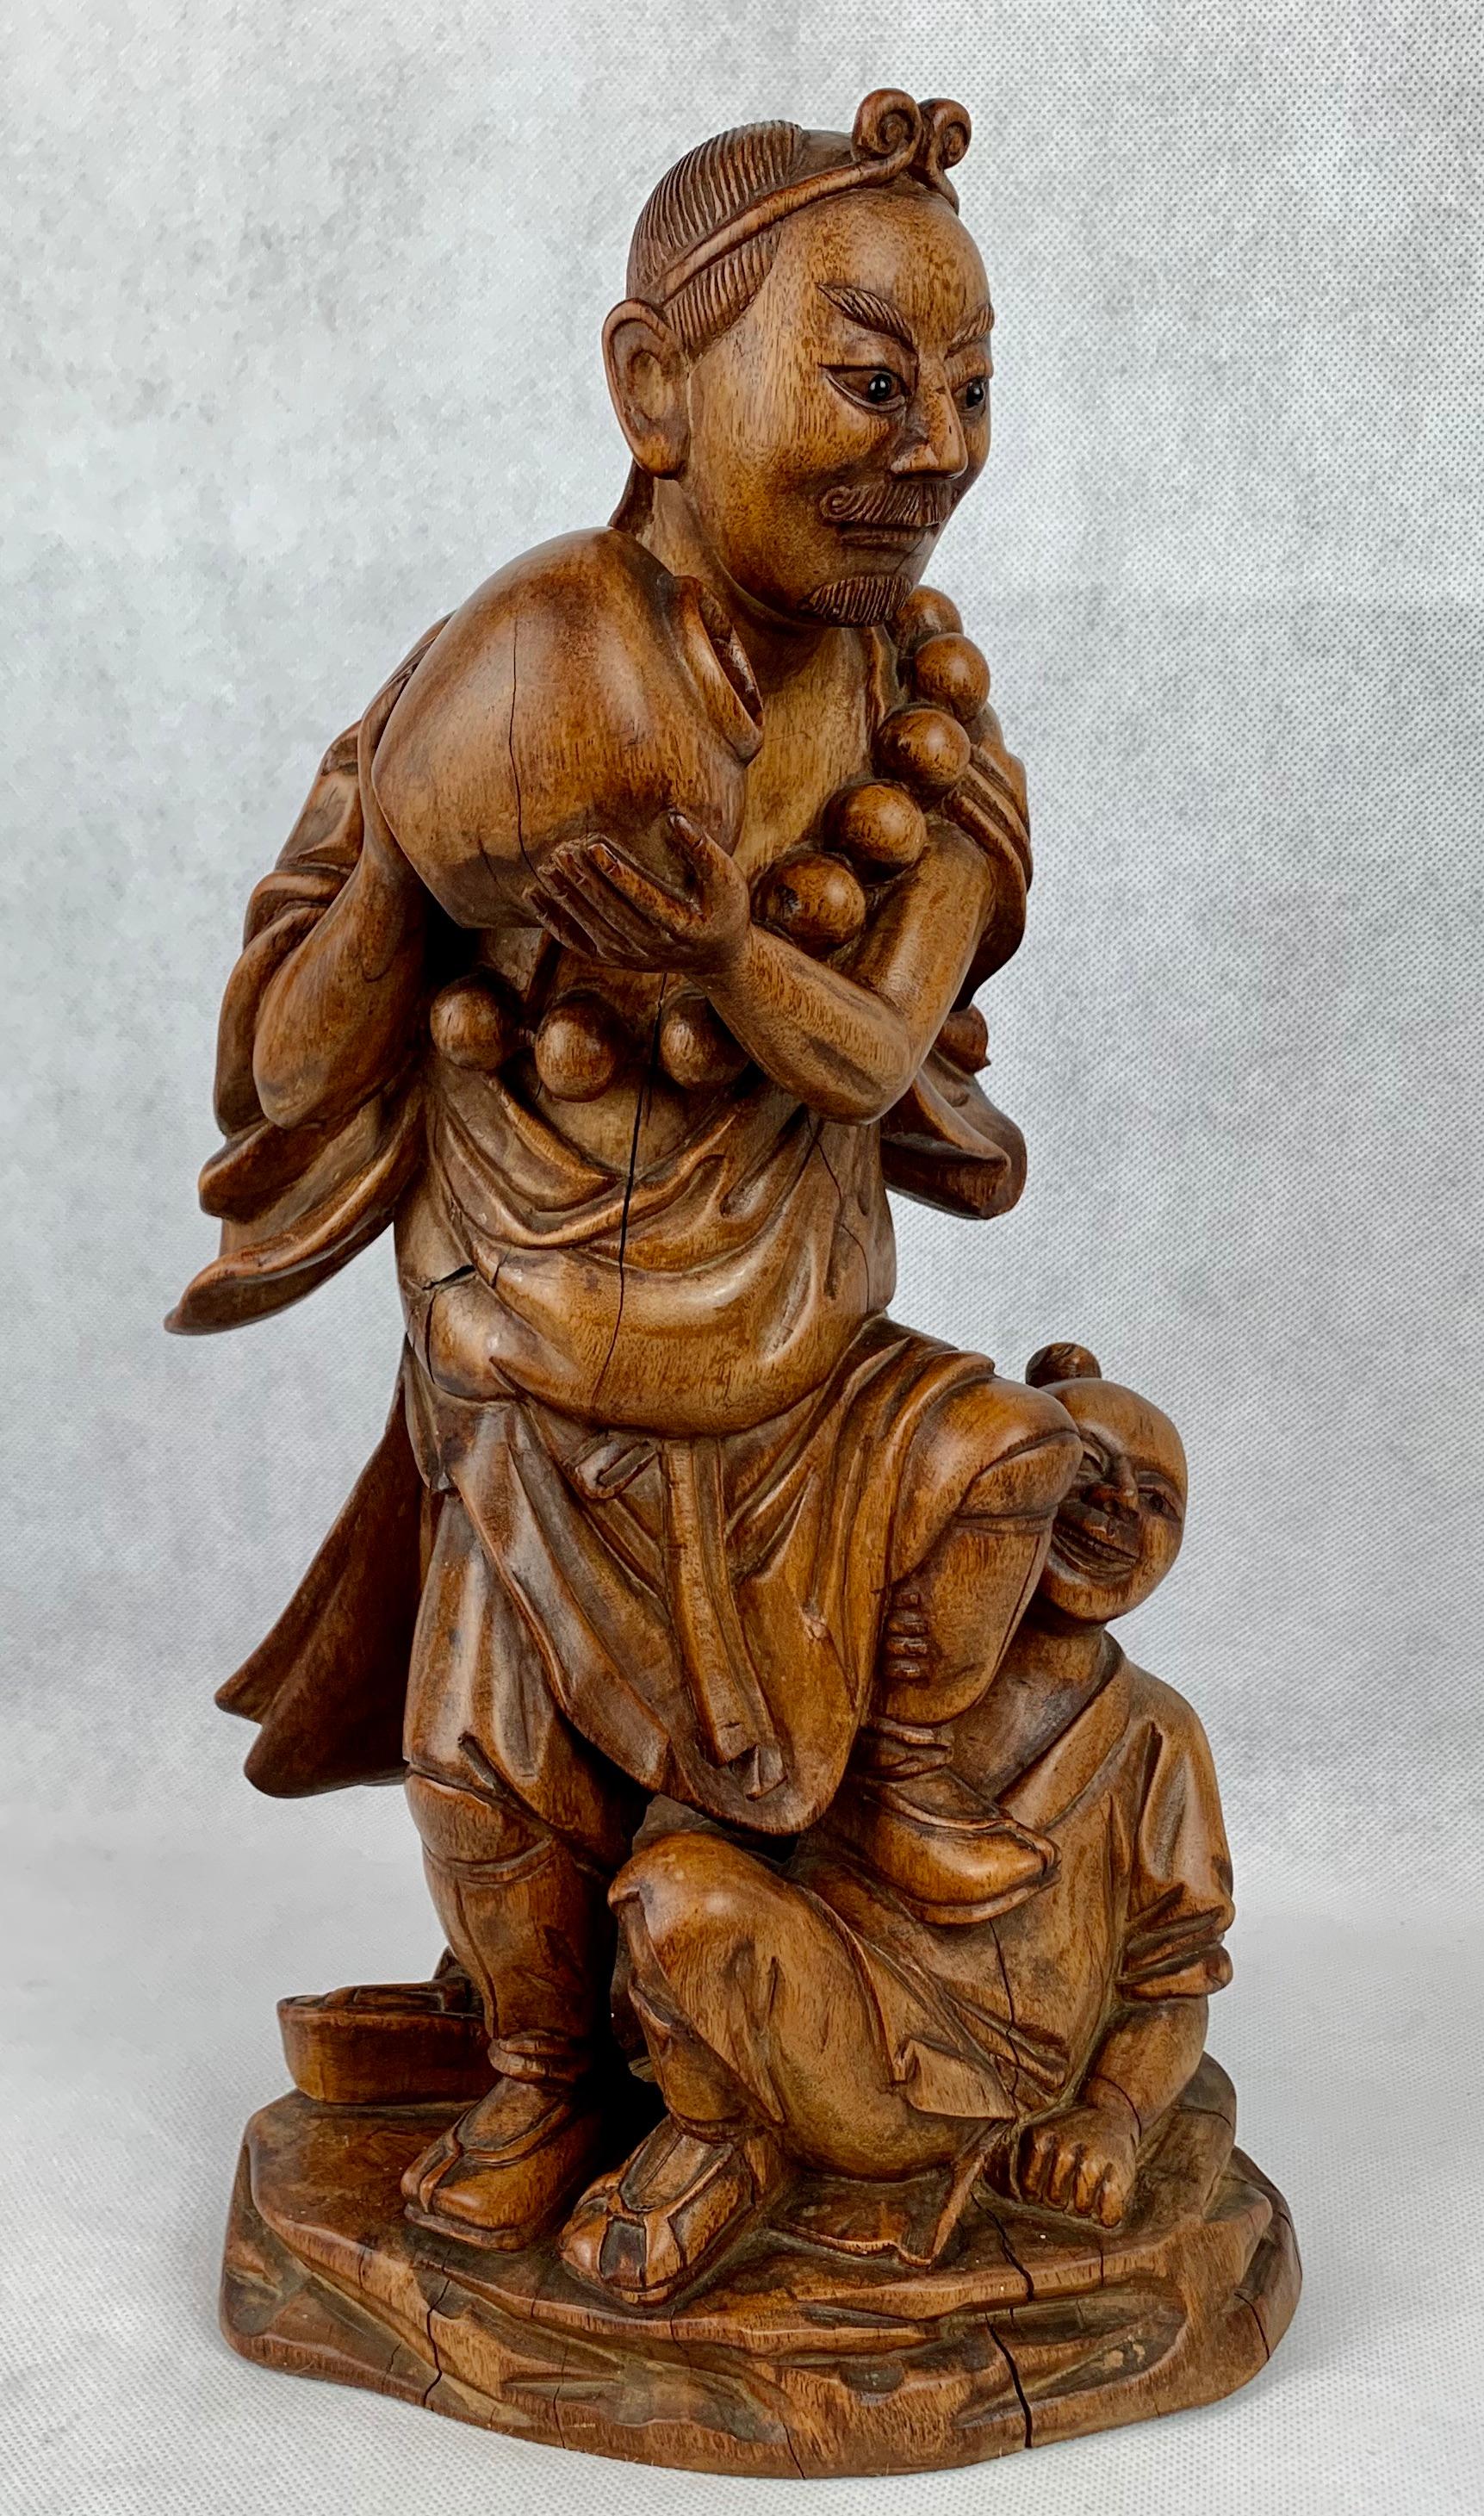 The Chinese teak carving of a male water bearer with a boy at his feet.
Due to age there are some splits, such as the one down the backside.  These do not affect the strength or usability of the figure.
Cleaned and polished by hand in our workshop.